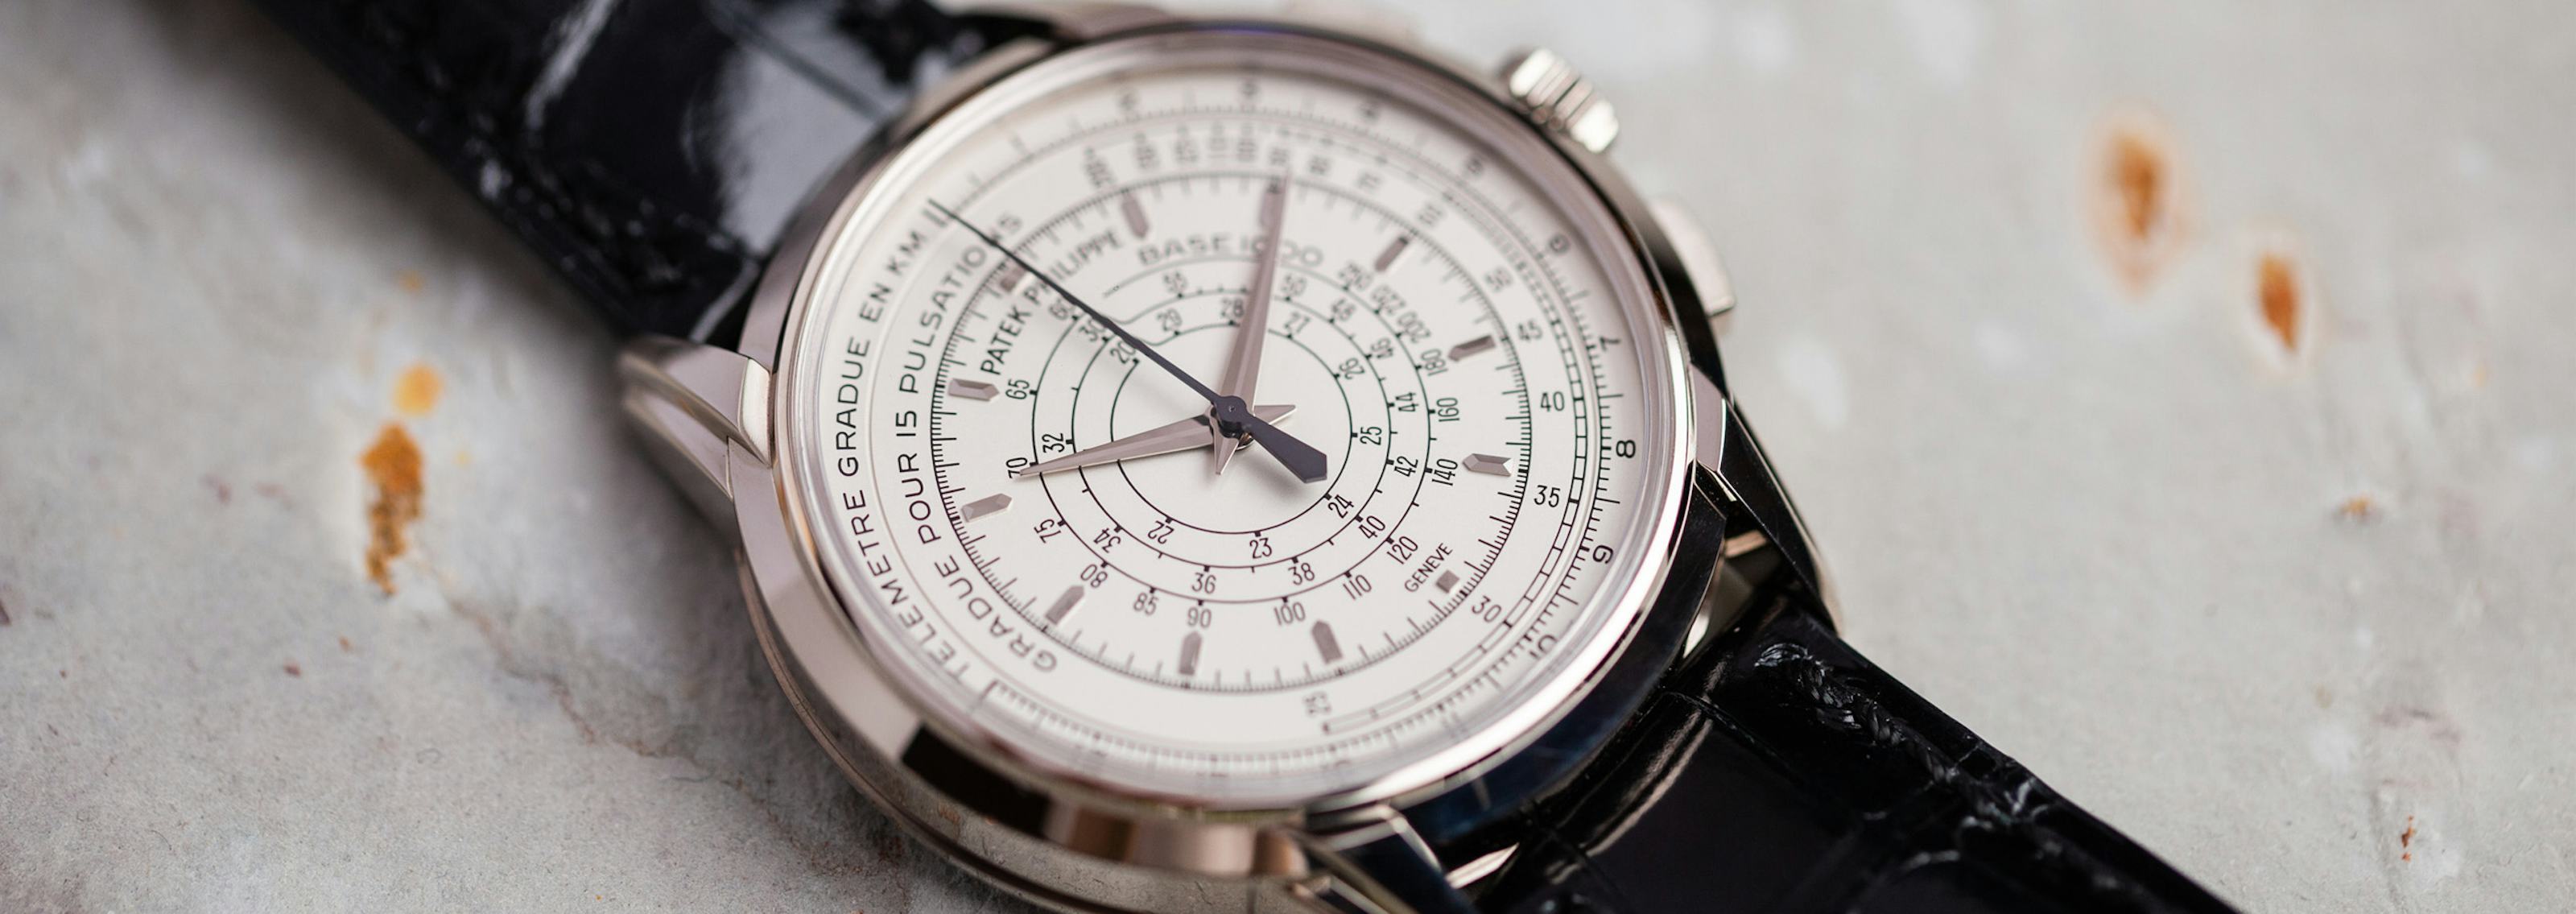 The Patek Philippe 5975 Stands Alone: A Multi-Scale Chronograph from the 175th Anniversary Collection